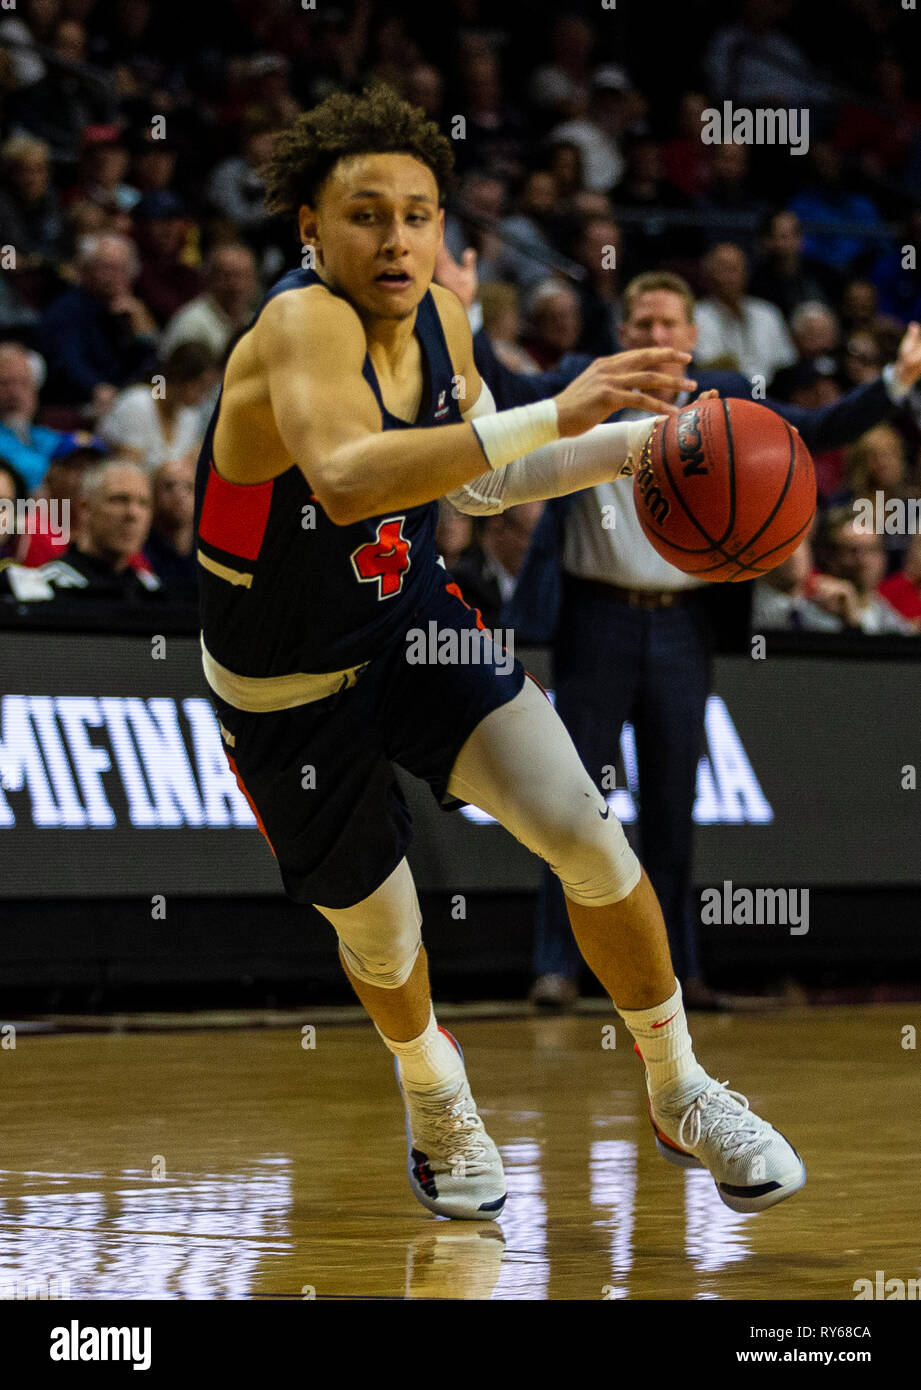 Mar 11 2019 Las Vegas, NV, U.S.A. Pepperdine guard Colbey Ross (4) drives to the basket during the NCAA West Coast Conference Men's Basketball Tournament semi -final between the Pepperdine Wave and the Gonzaga Bulldogs 74-100 lost at Orleans Arena Las Vegas, NV. Thurman James/CSM Stock Photo